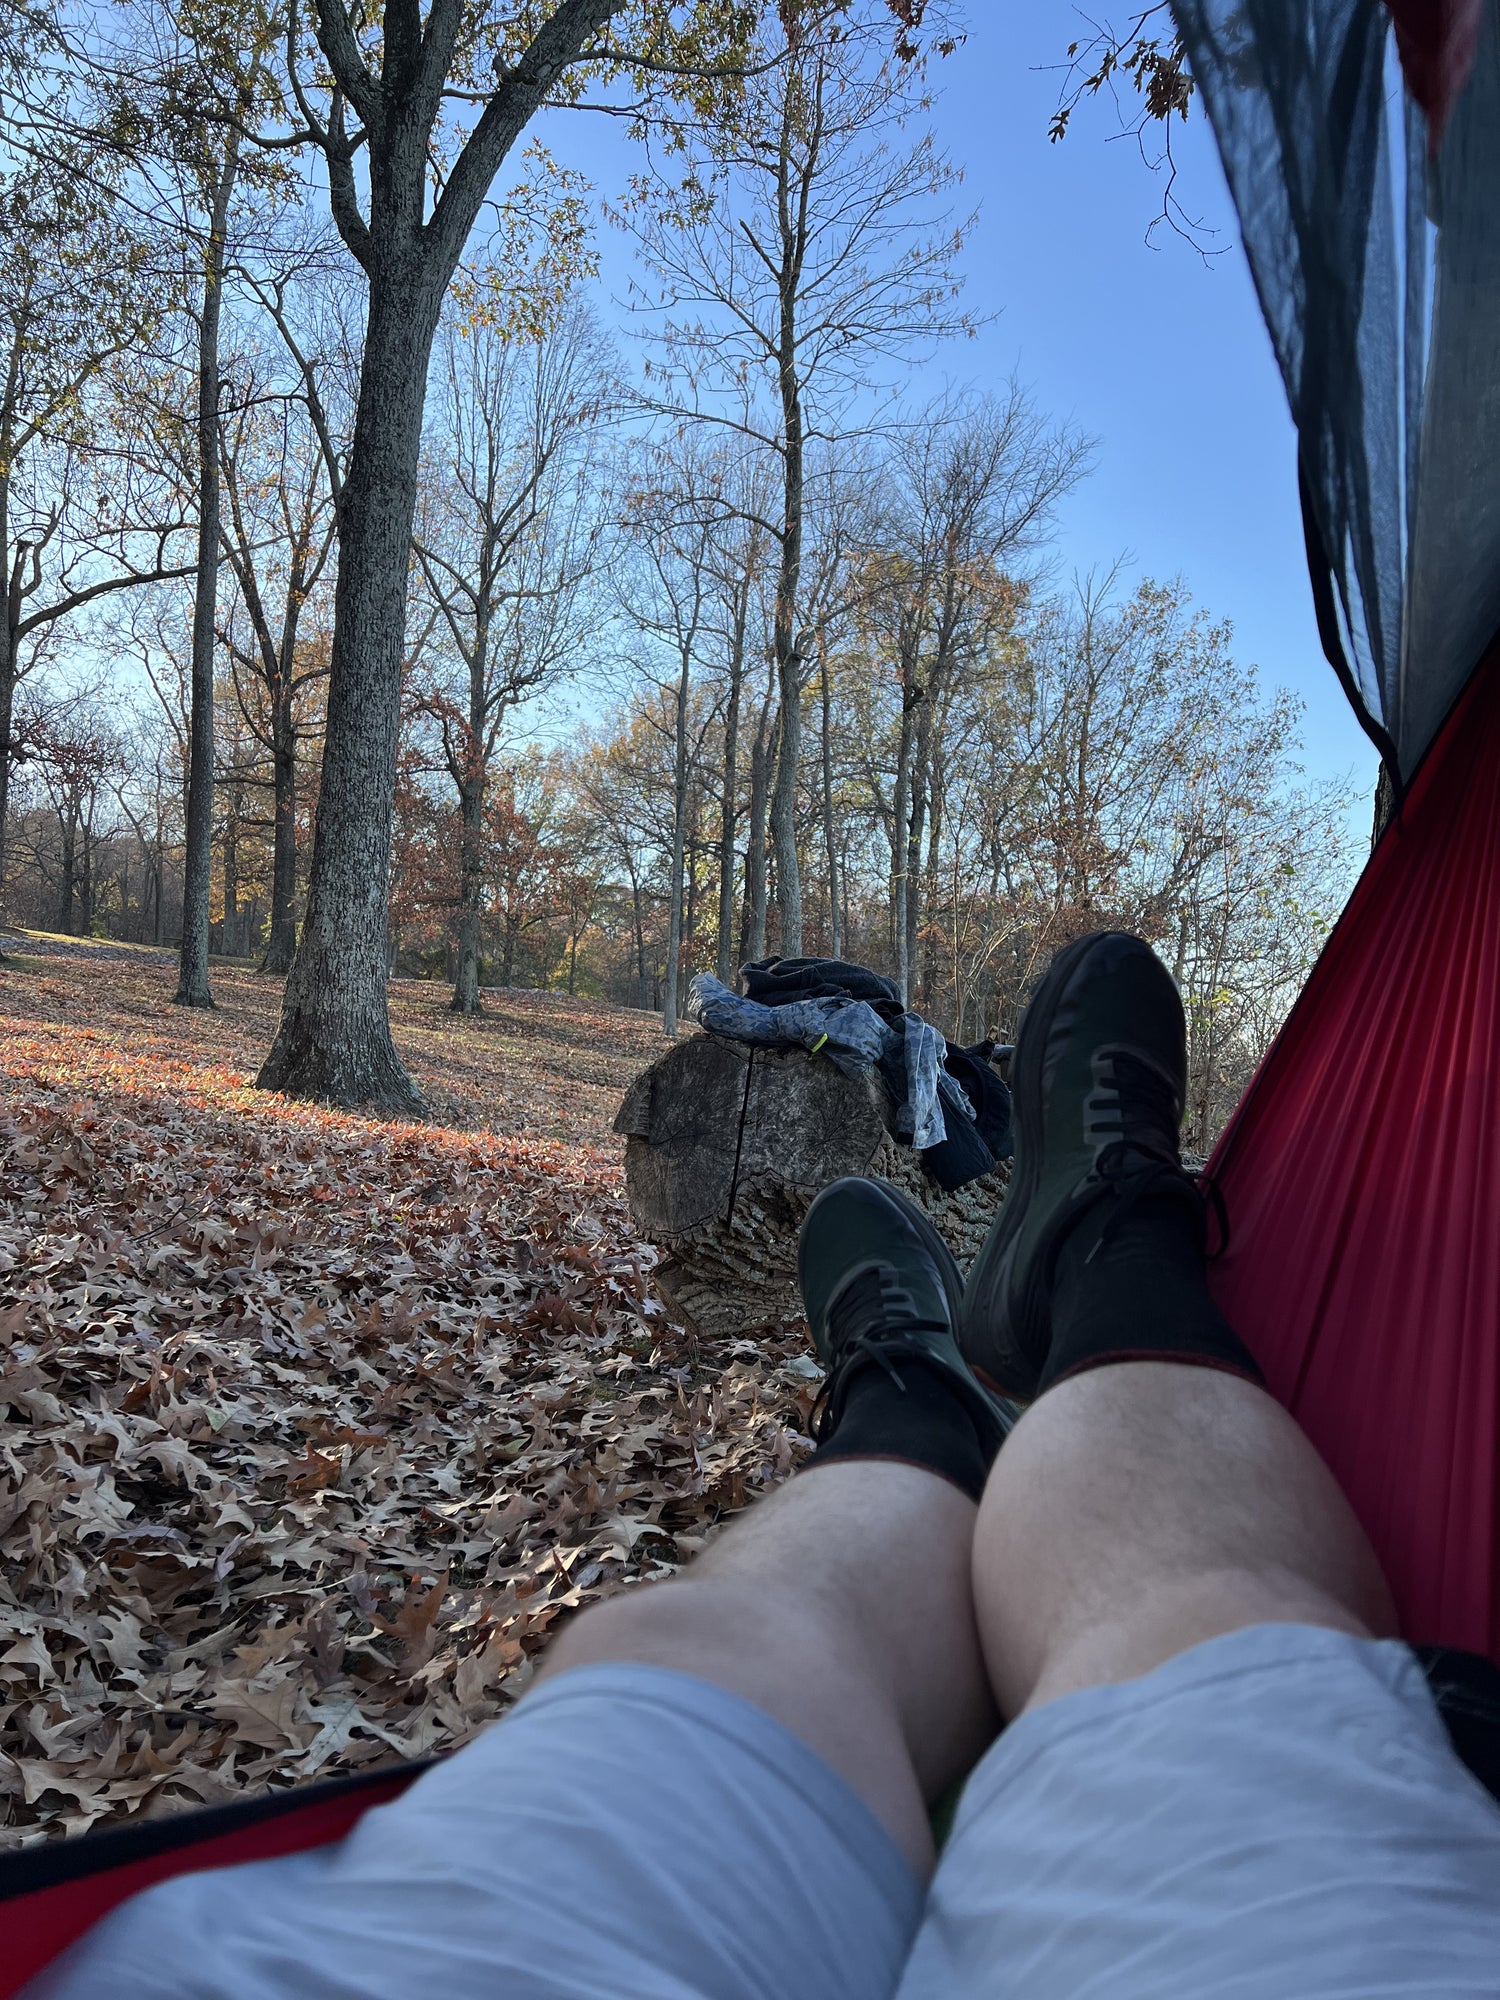 POV point of view laying in a red ultralight camping hammock custom made what dream hammock with bugnet or mosquito net the best